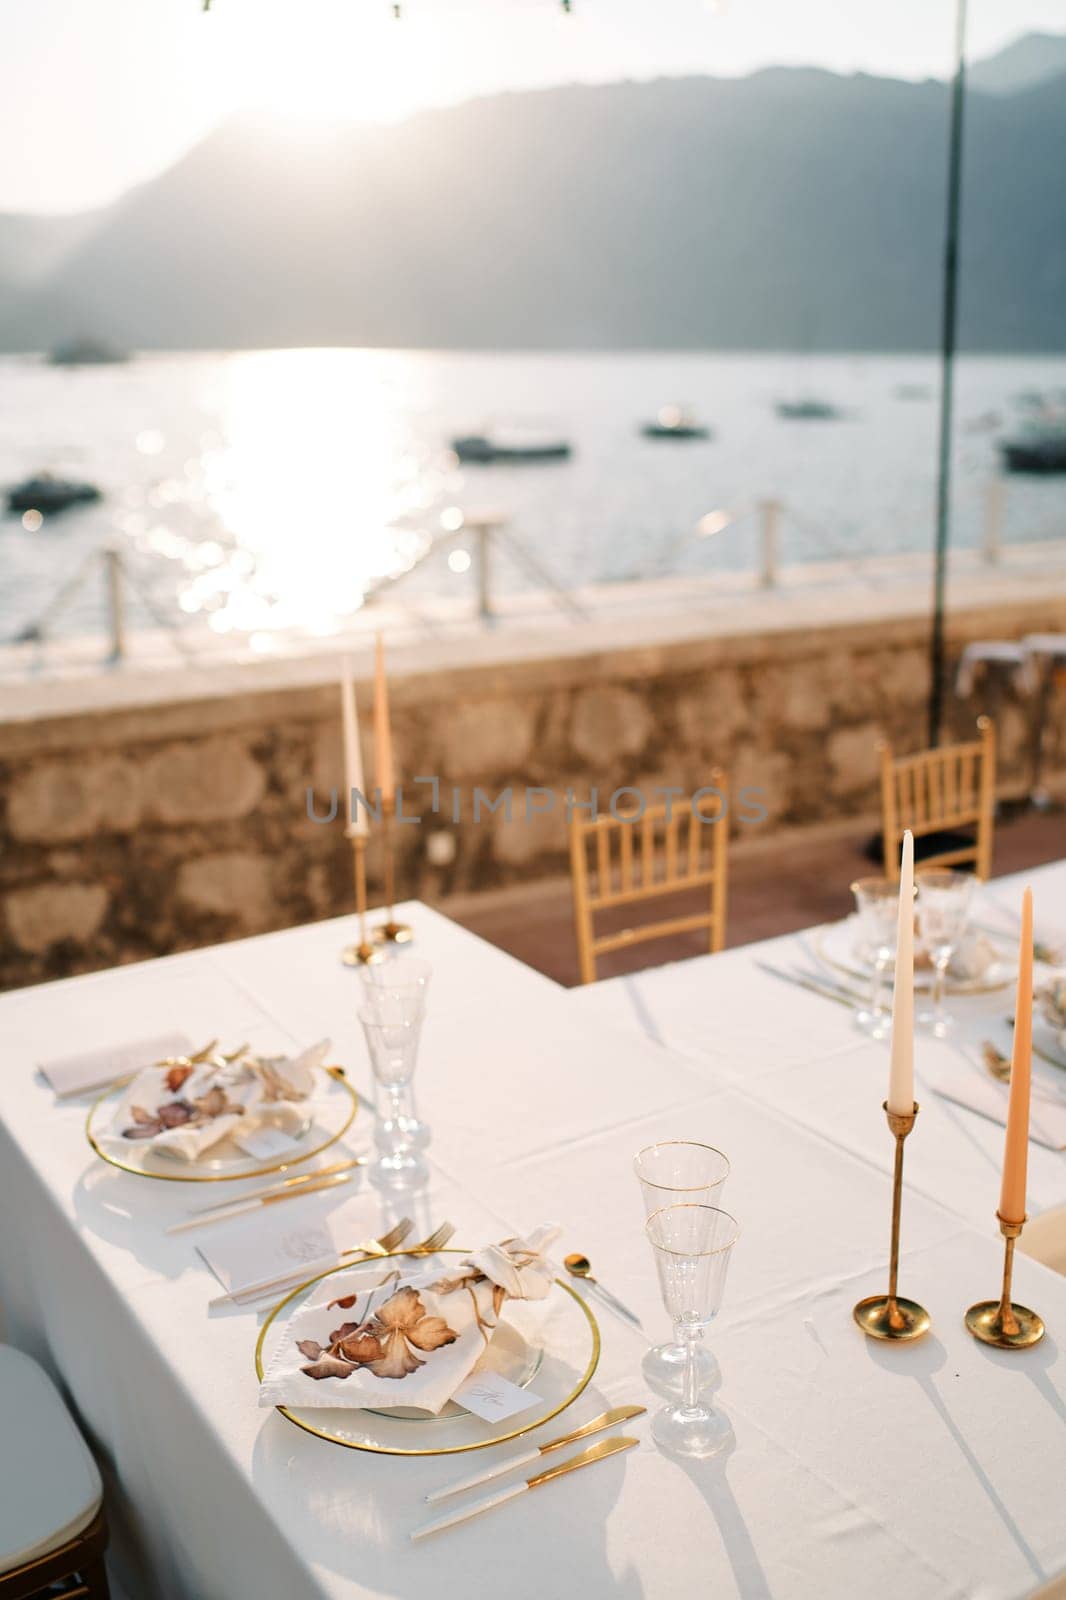 Bride and groom festive table with candles and menu stands on the terrace by the sea. High quality photo